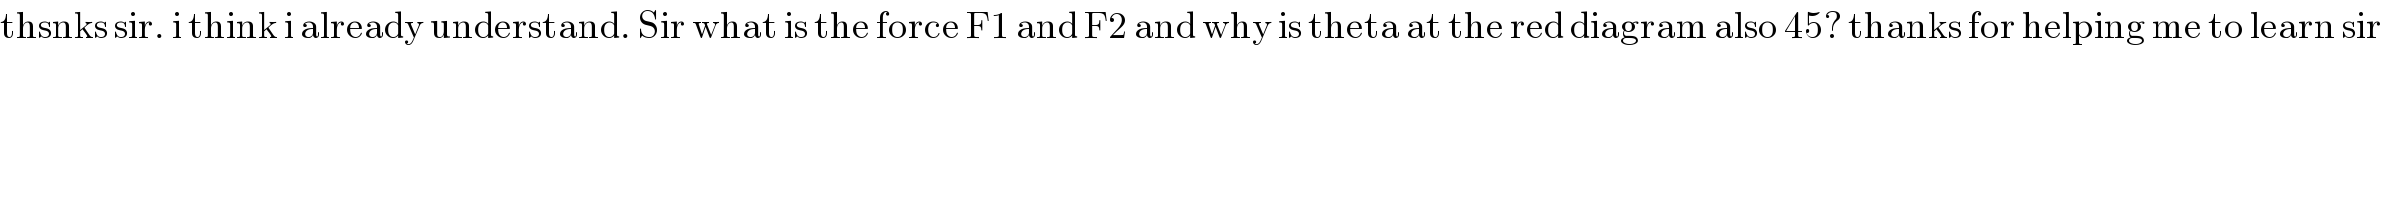 thsnks sir. i think i already understand. Sir what is the force F1 and F2 and why is theta at the red diagram also 45? thanks for helping me to learn sir  